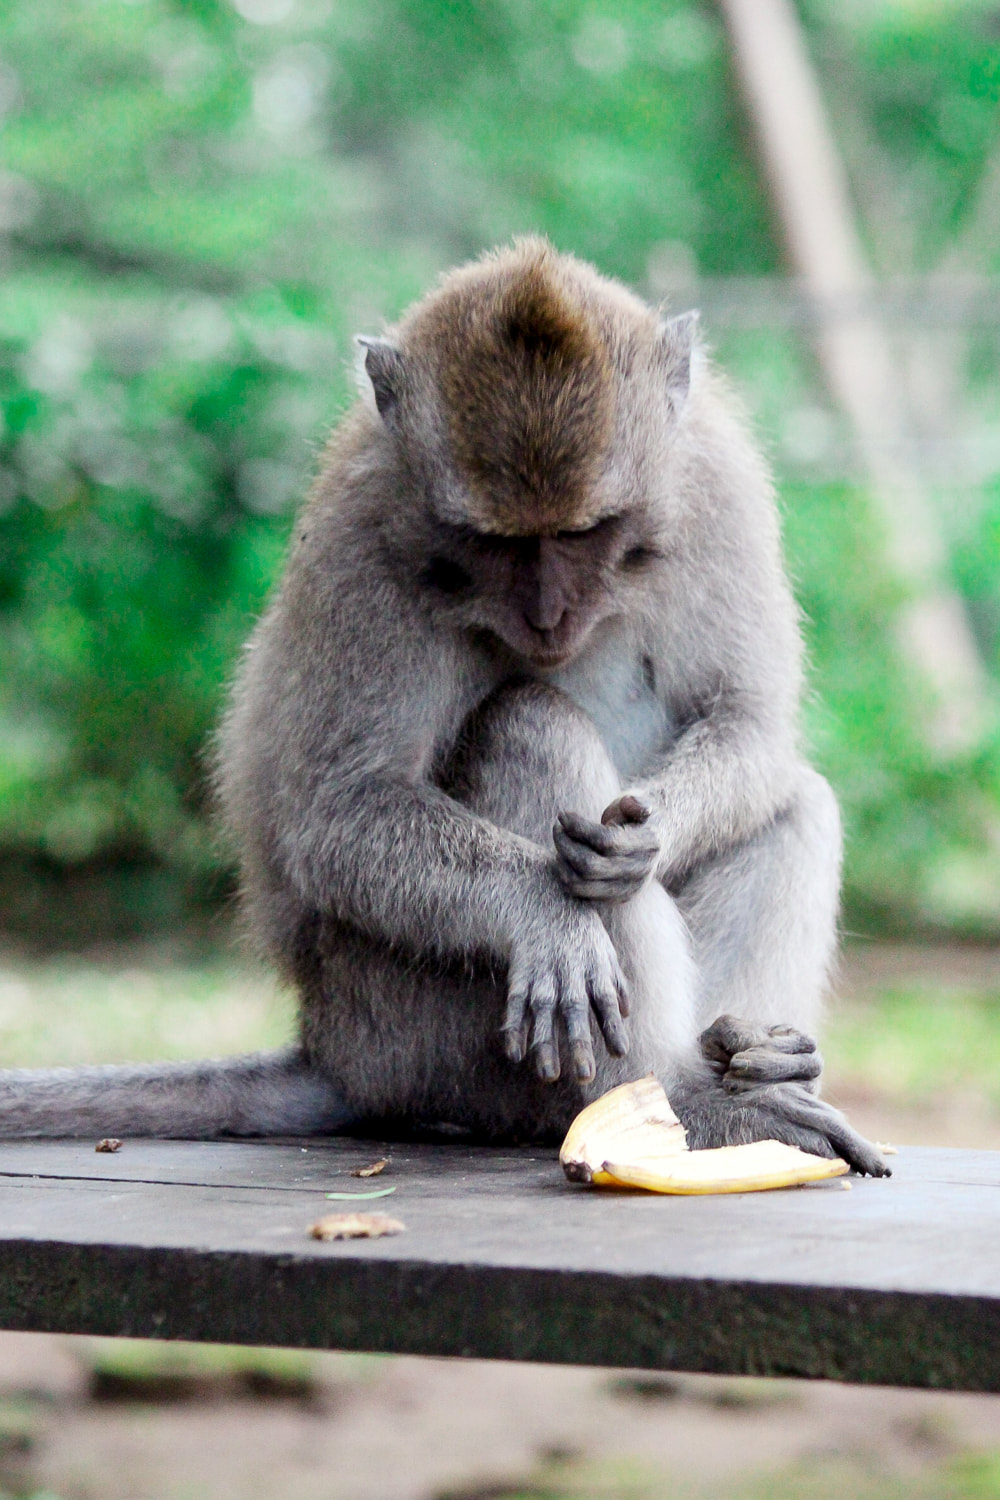 A baby Grey-haired, long-tail, macaque. Dinner time (Bananas) at the Sacred Monkey Forest Sanctuary, Ubud, Bali, Indonesia.